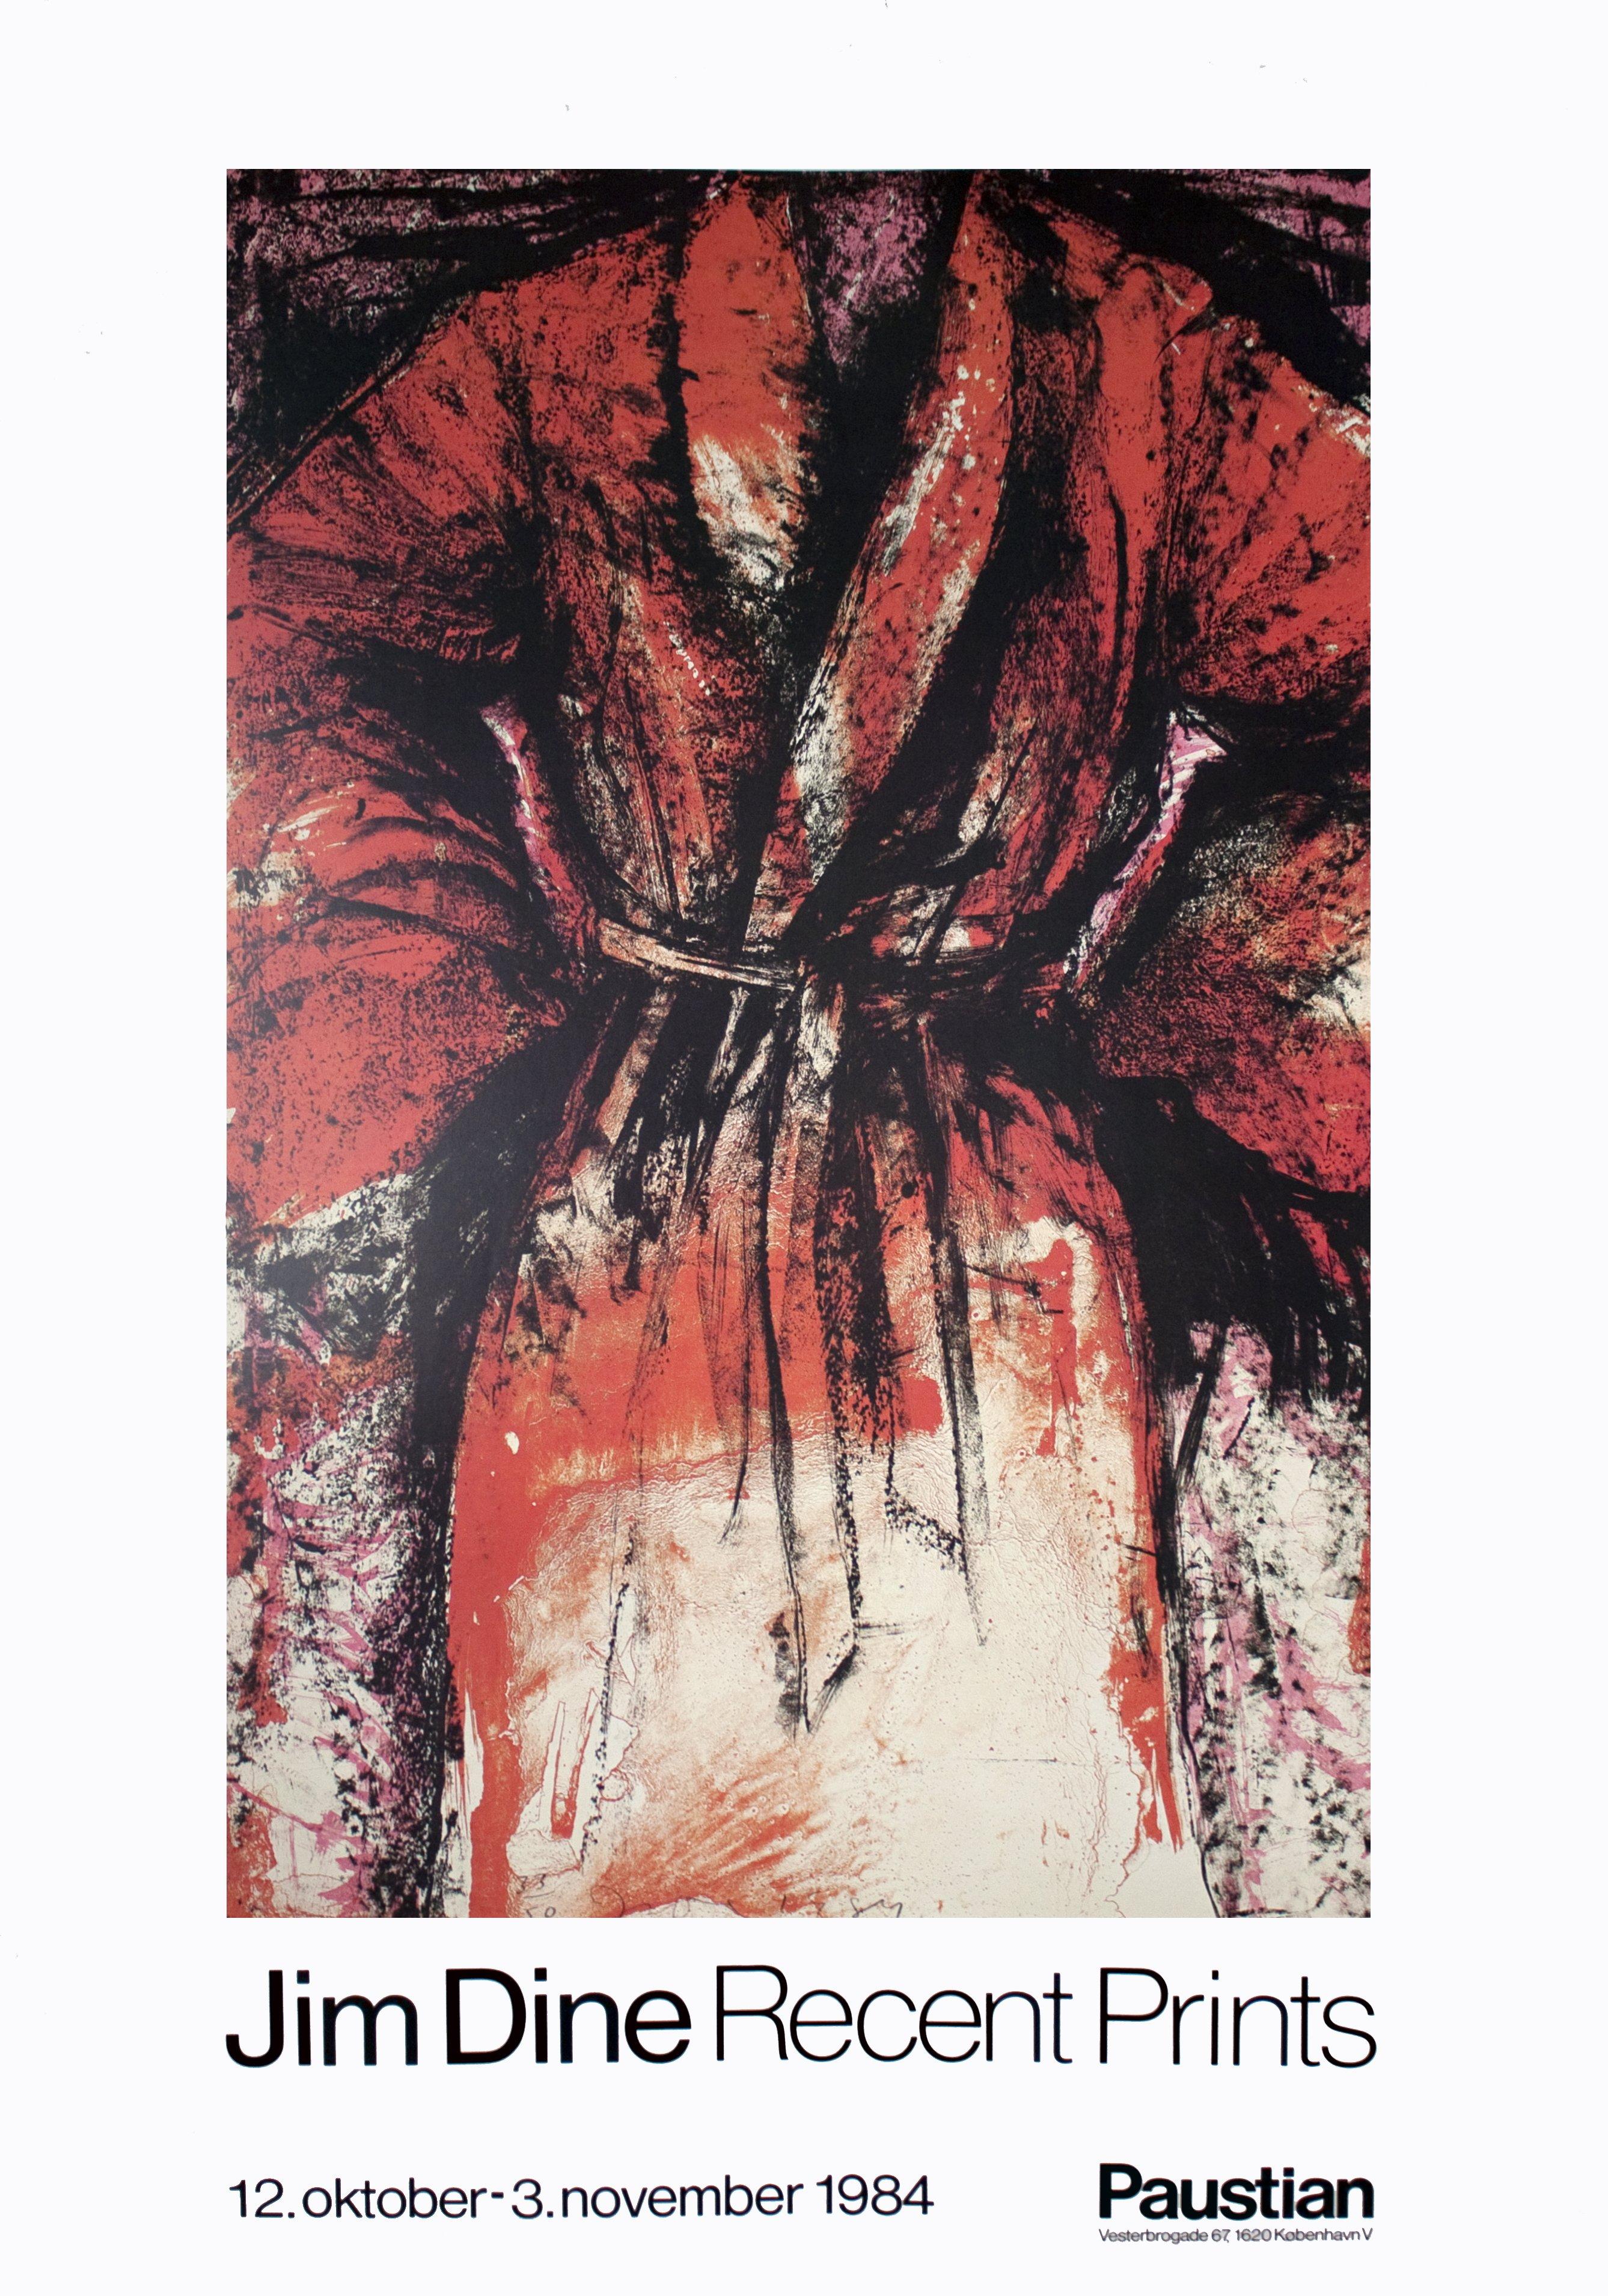  Paper Size: 49.5 x 34.75 inches ( 125.73 x 88.265 cm )
 Image Size: 37.25 x 24.25 inches ( 94.615 x 61.595 cm )

 The Jim Dine exhibition poster from 1984, a first edition, promoted an exhibition at Paustian Gallery located at Vestergade 67 in